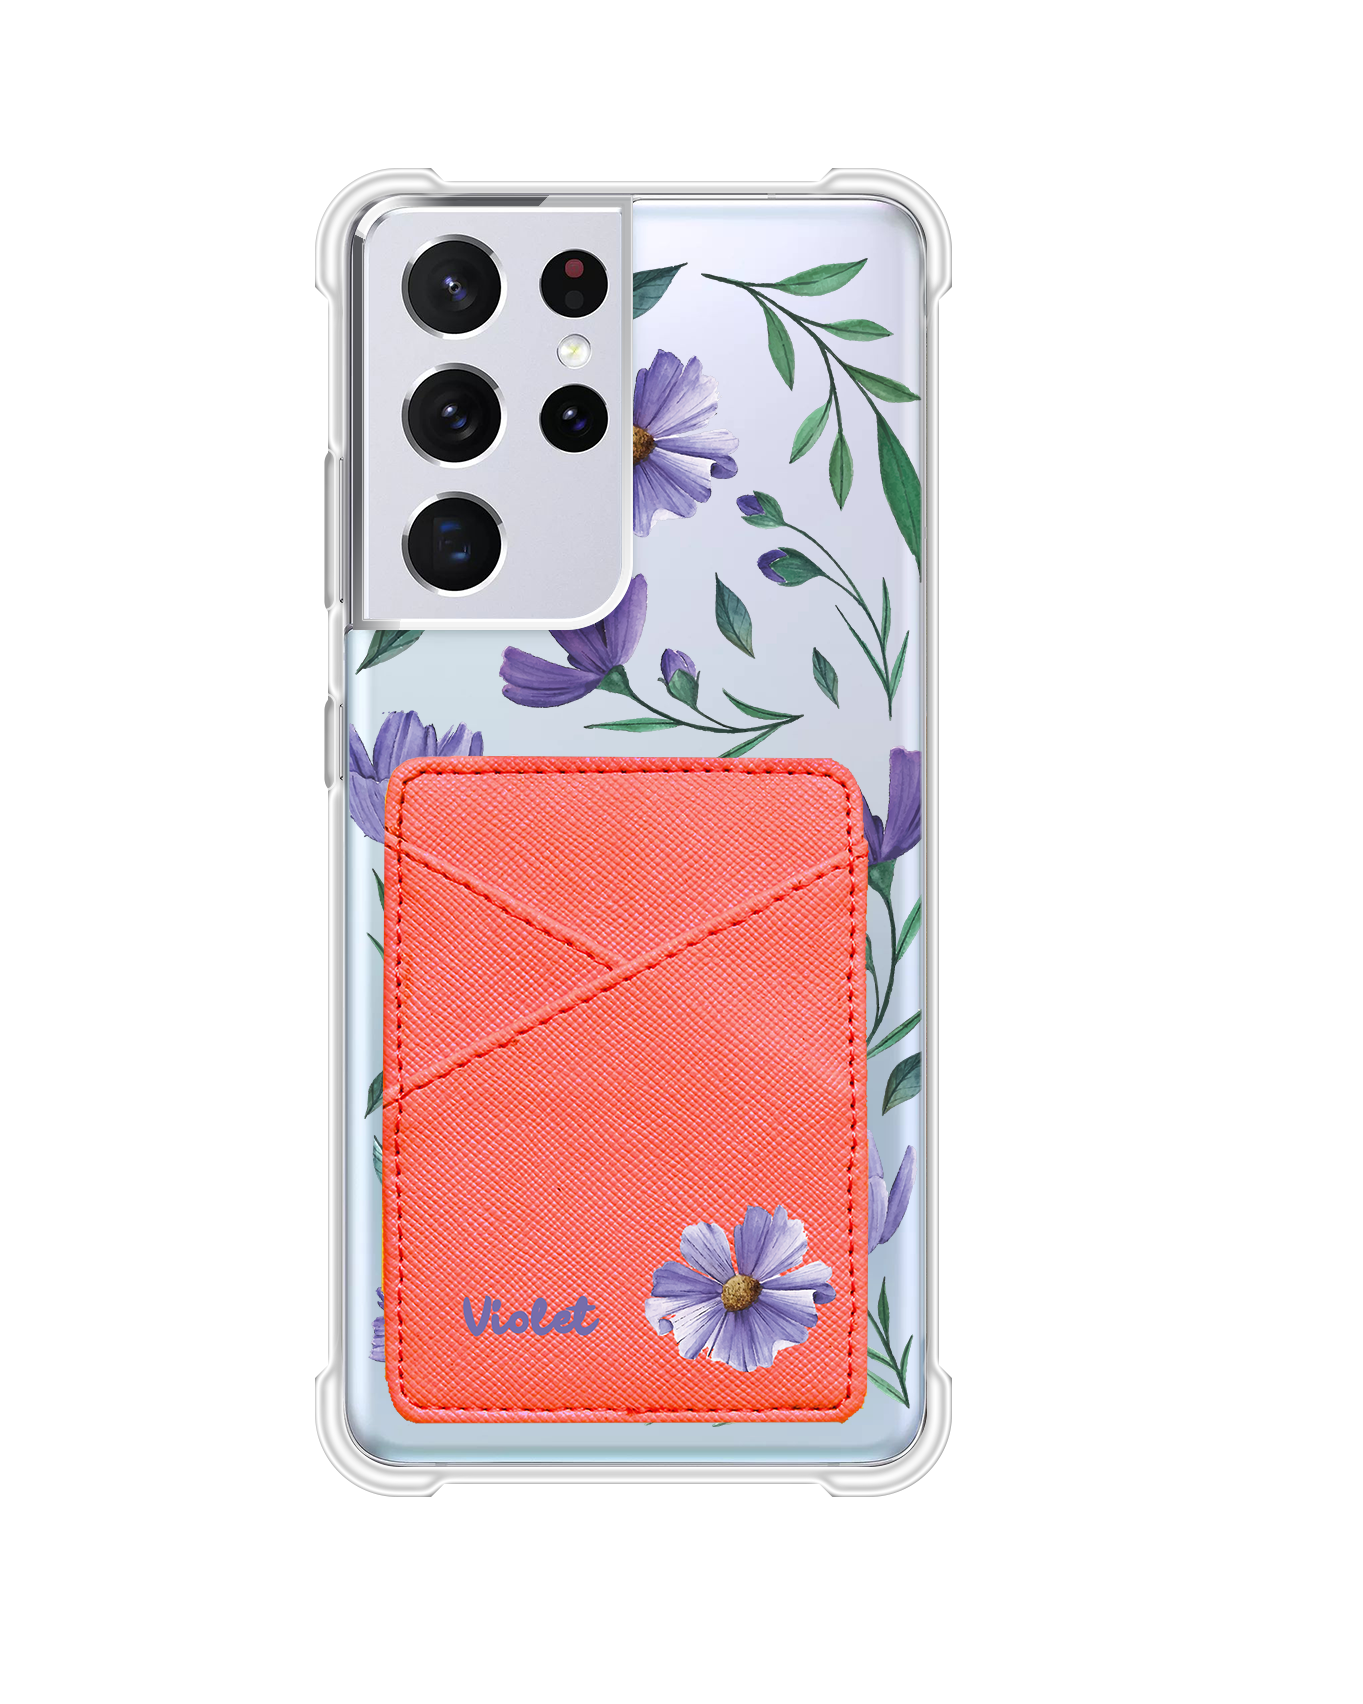 Android Phone Wallet Case - February Violets 1.0